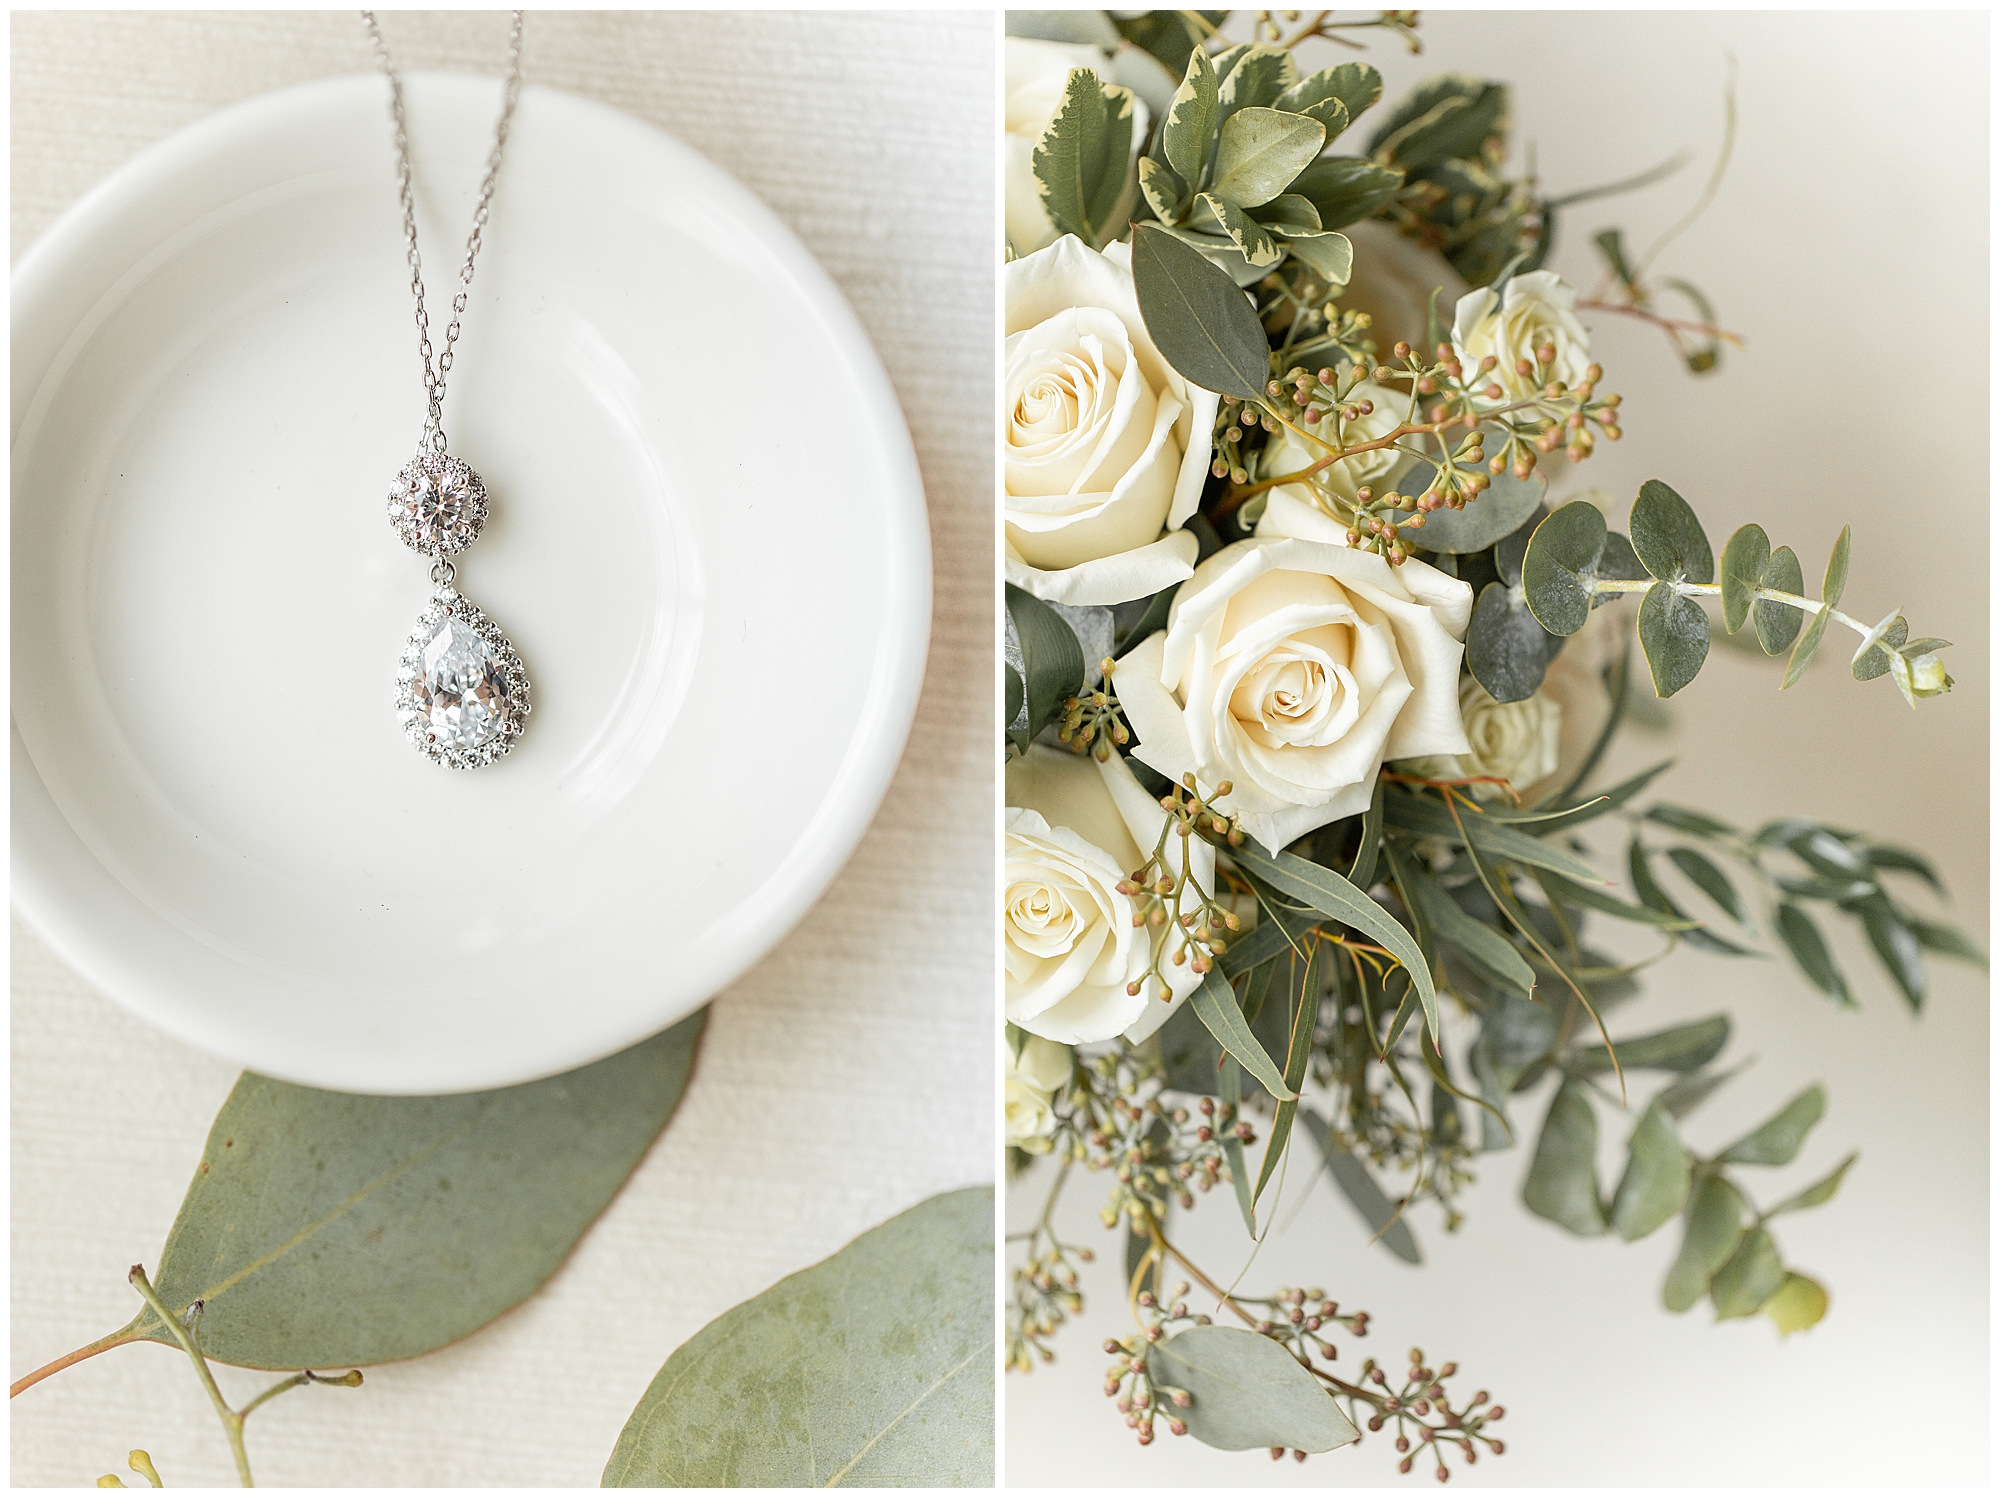 wedding necklace and bouquet details 